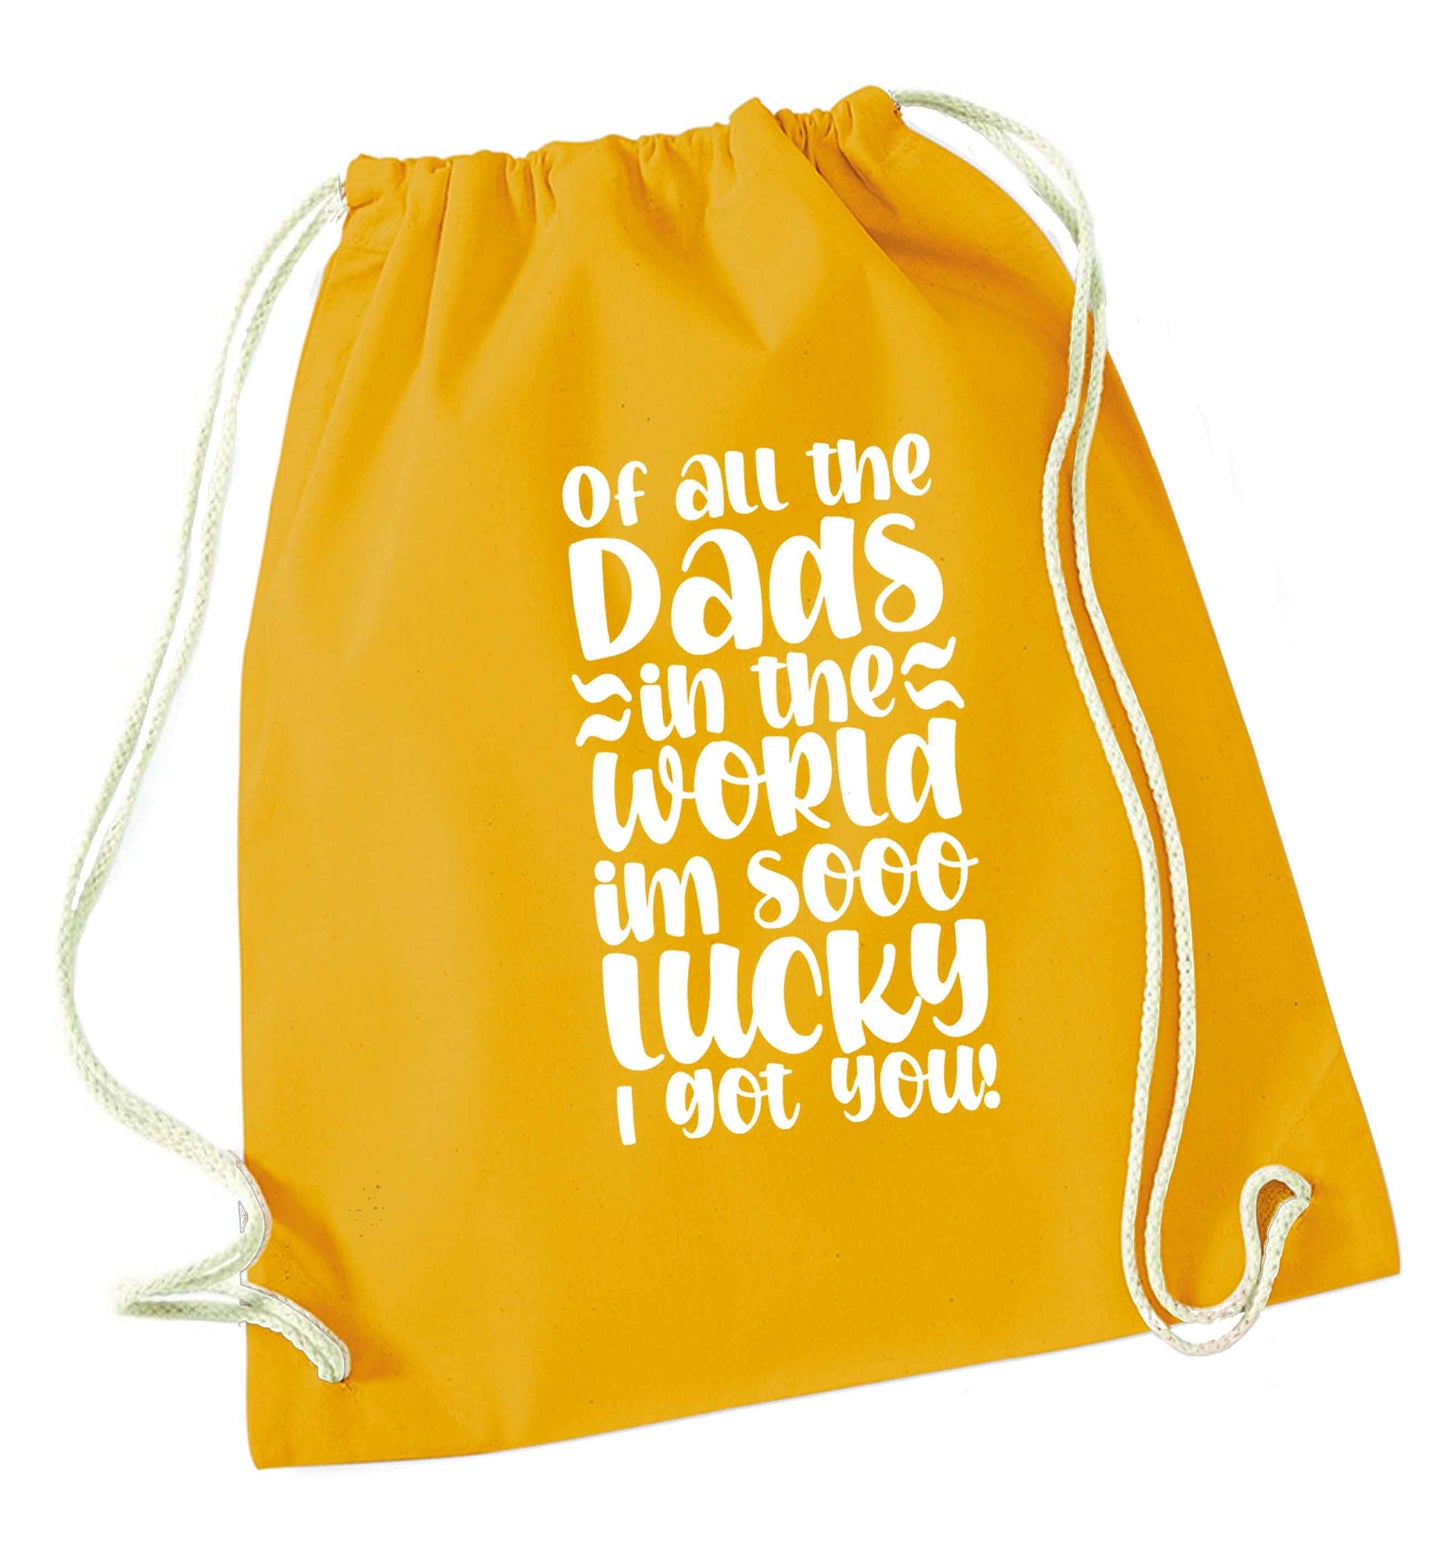 Of all the Dads in the world I'm so lucky I got you mustard drawstring bag